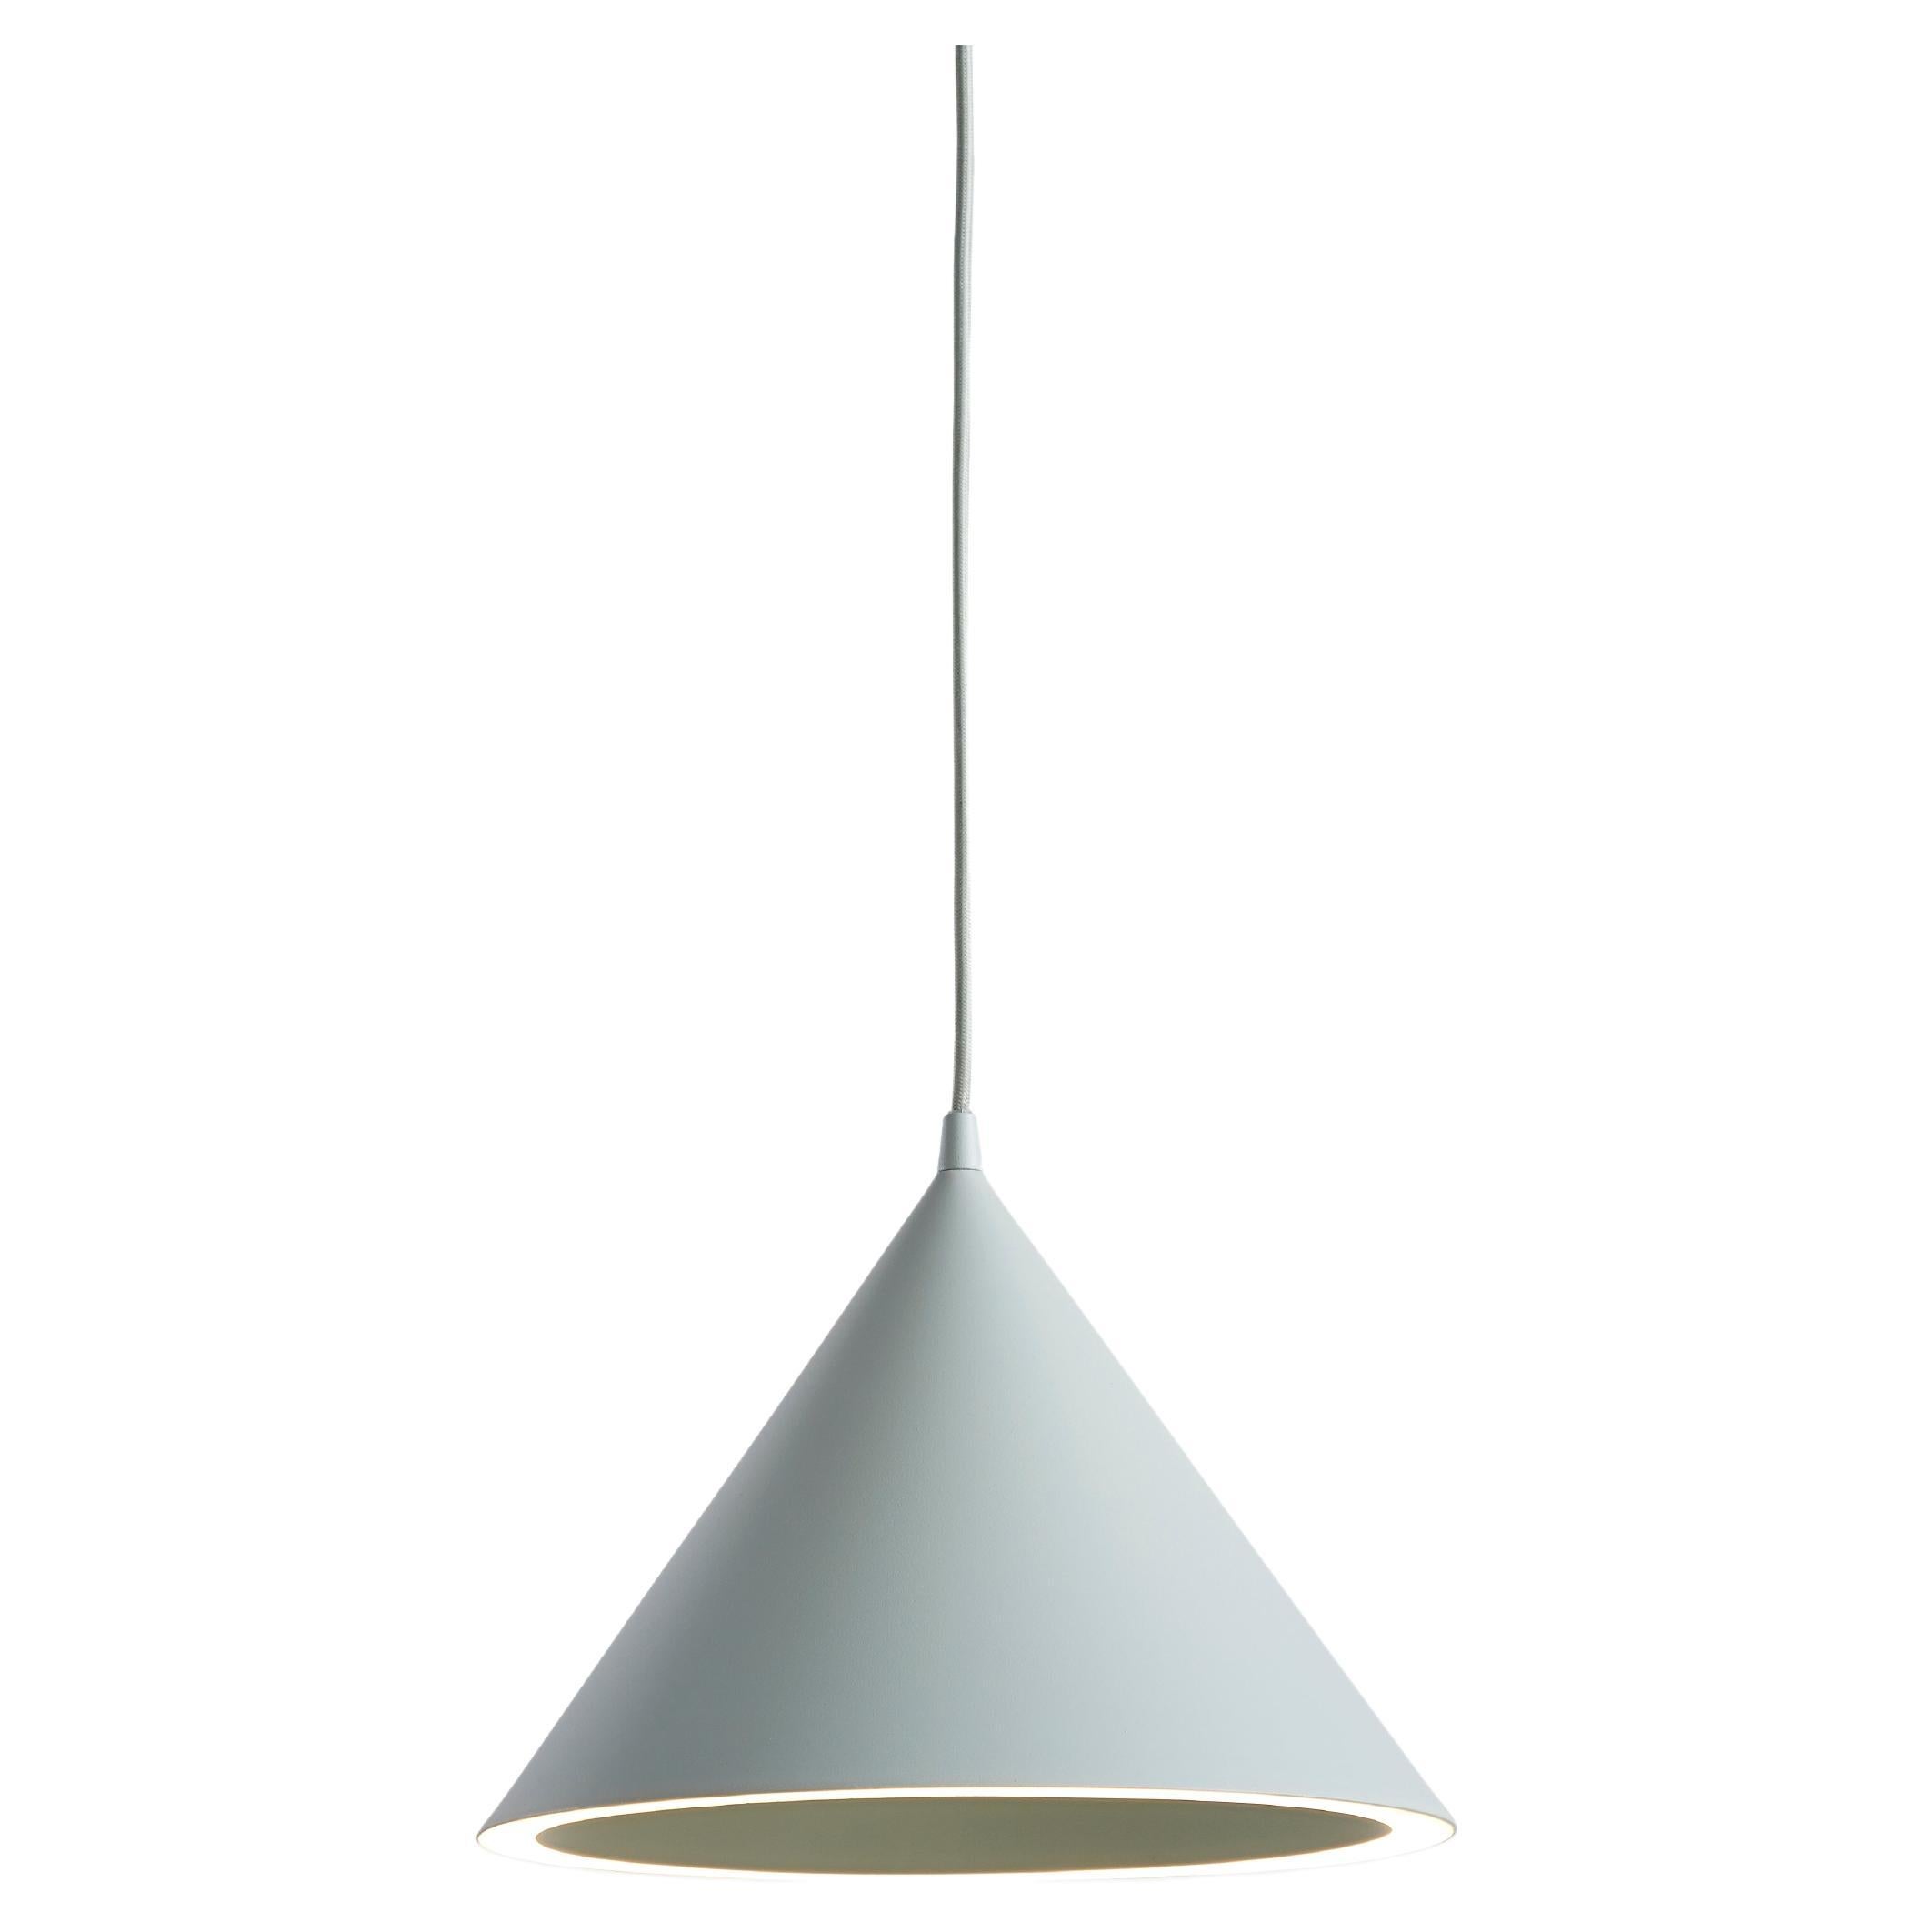 Small Mint Annular Pendant Lamp by MSDS Studio